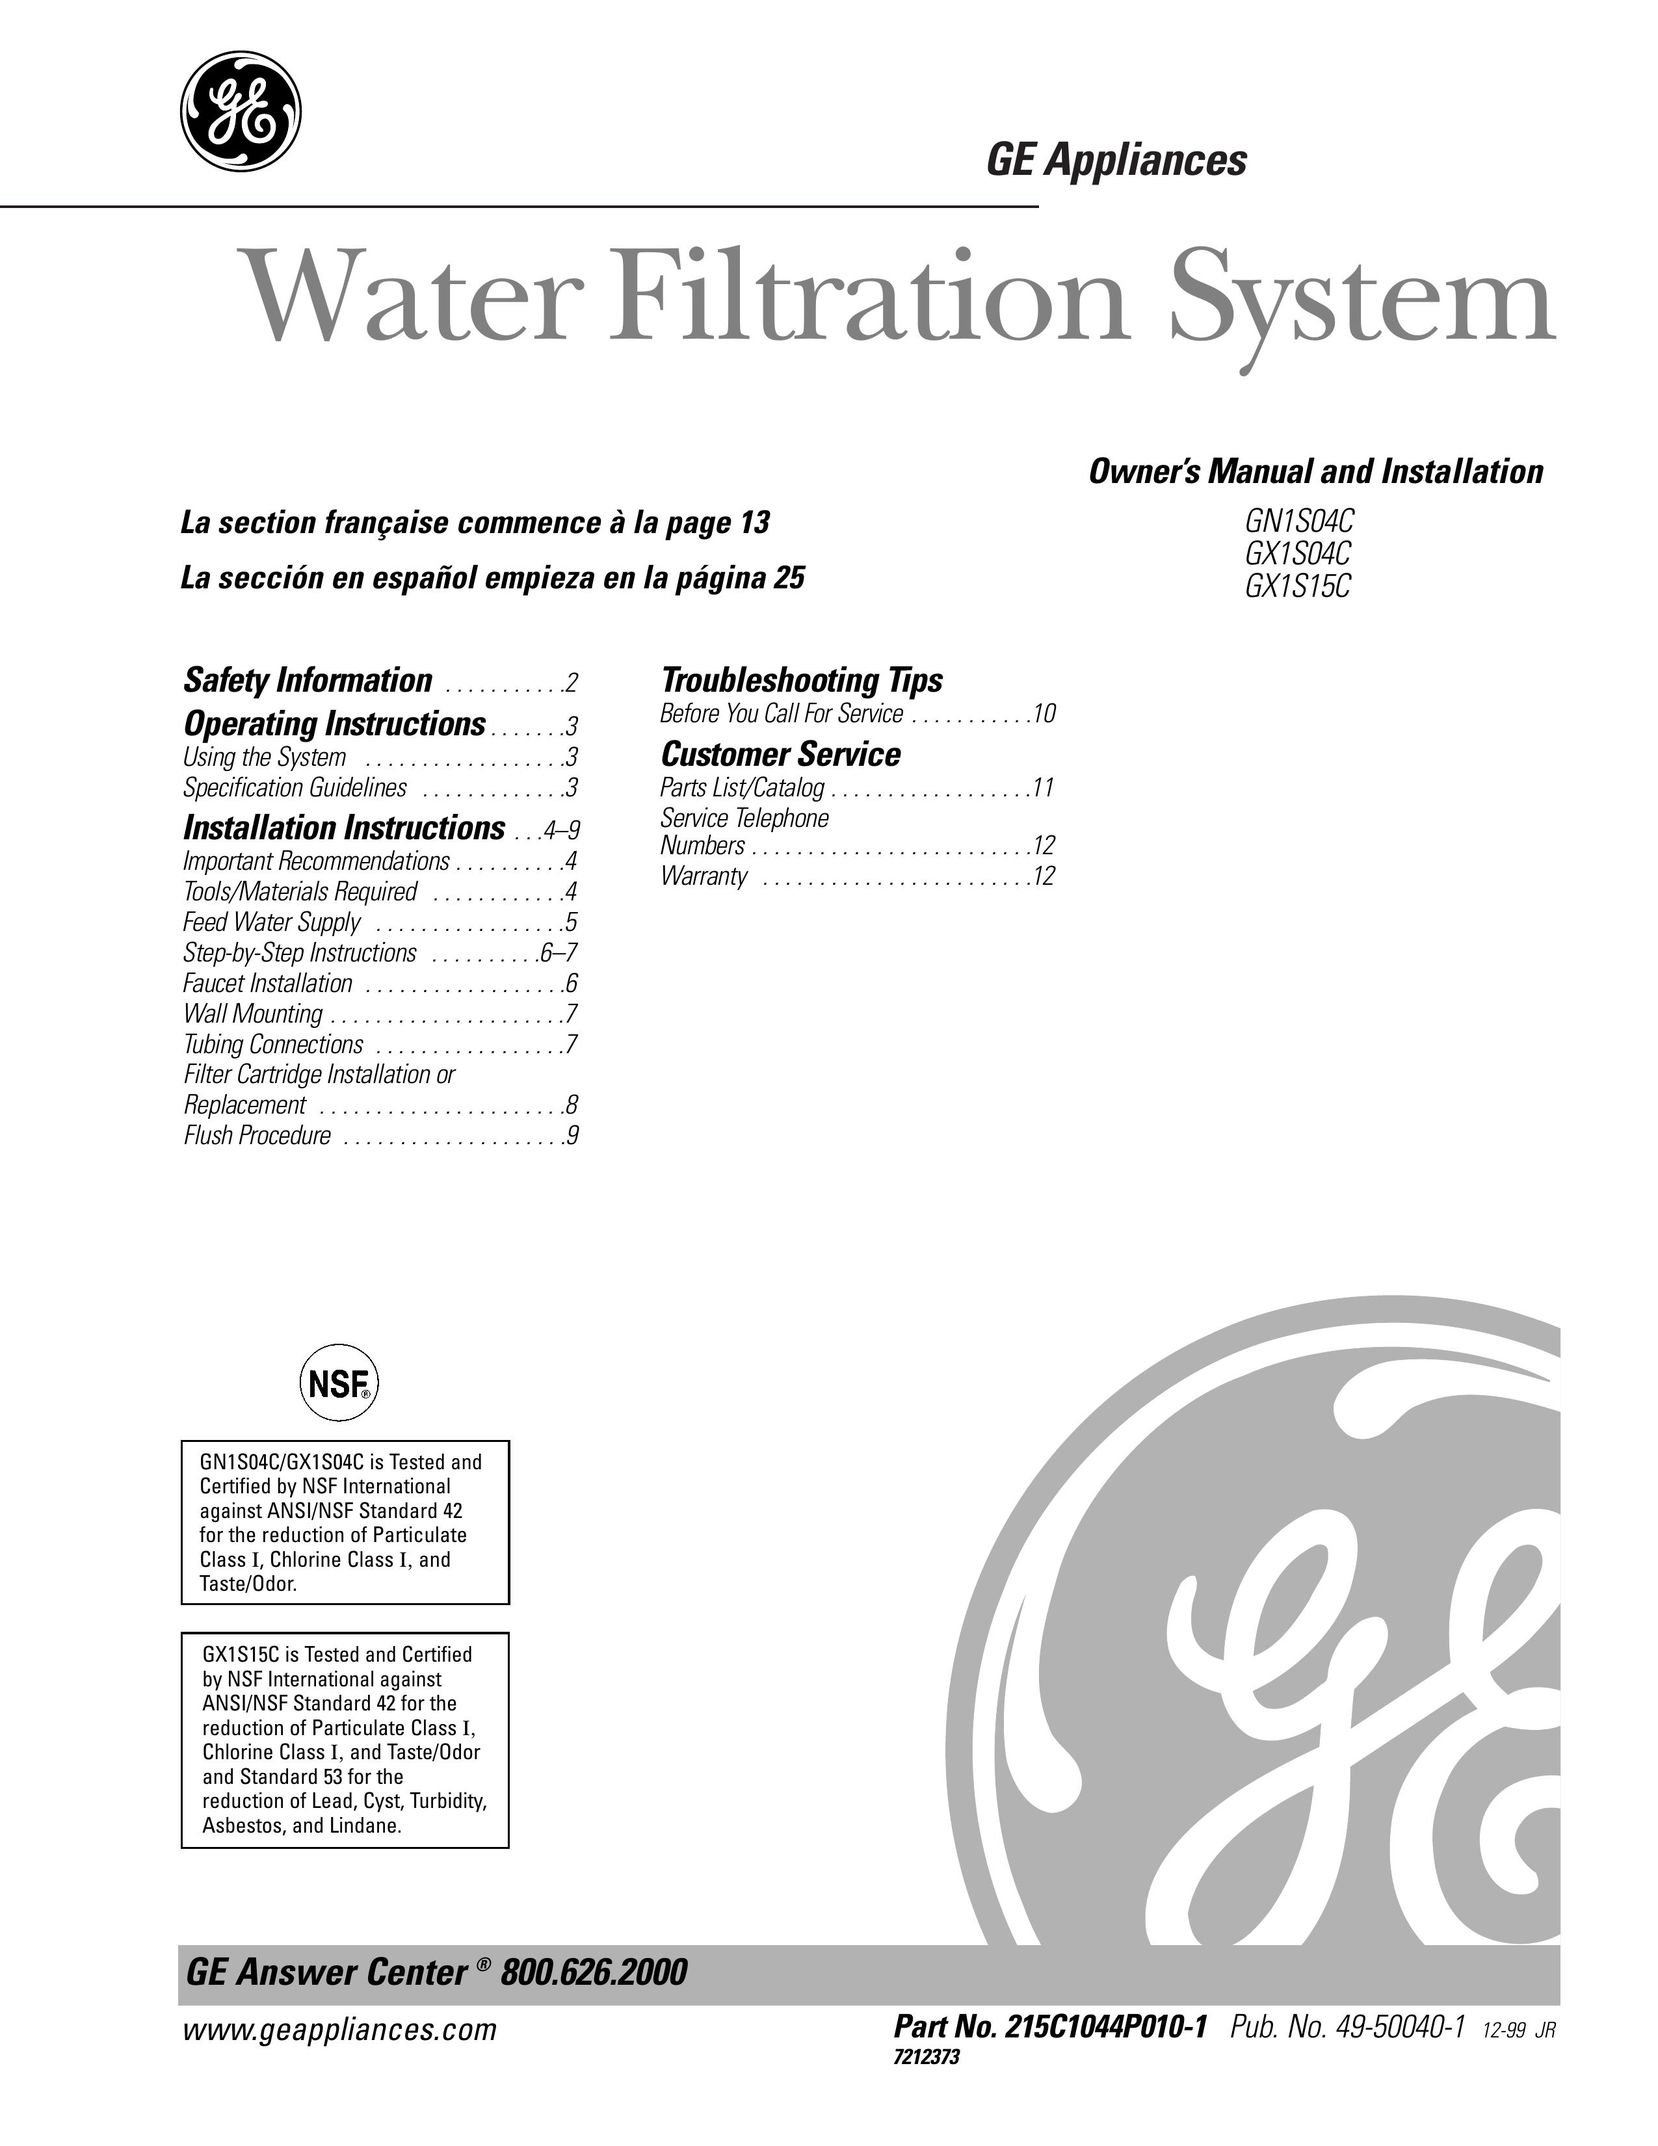 GE GX1S15C Stereo System User Manual